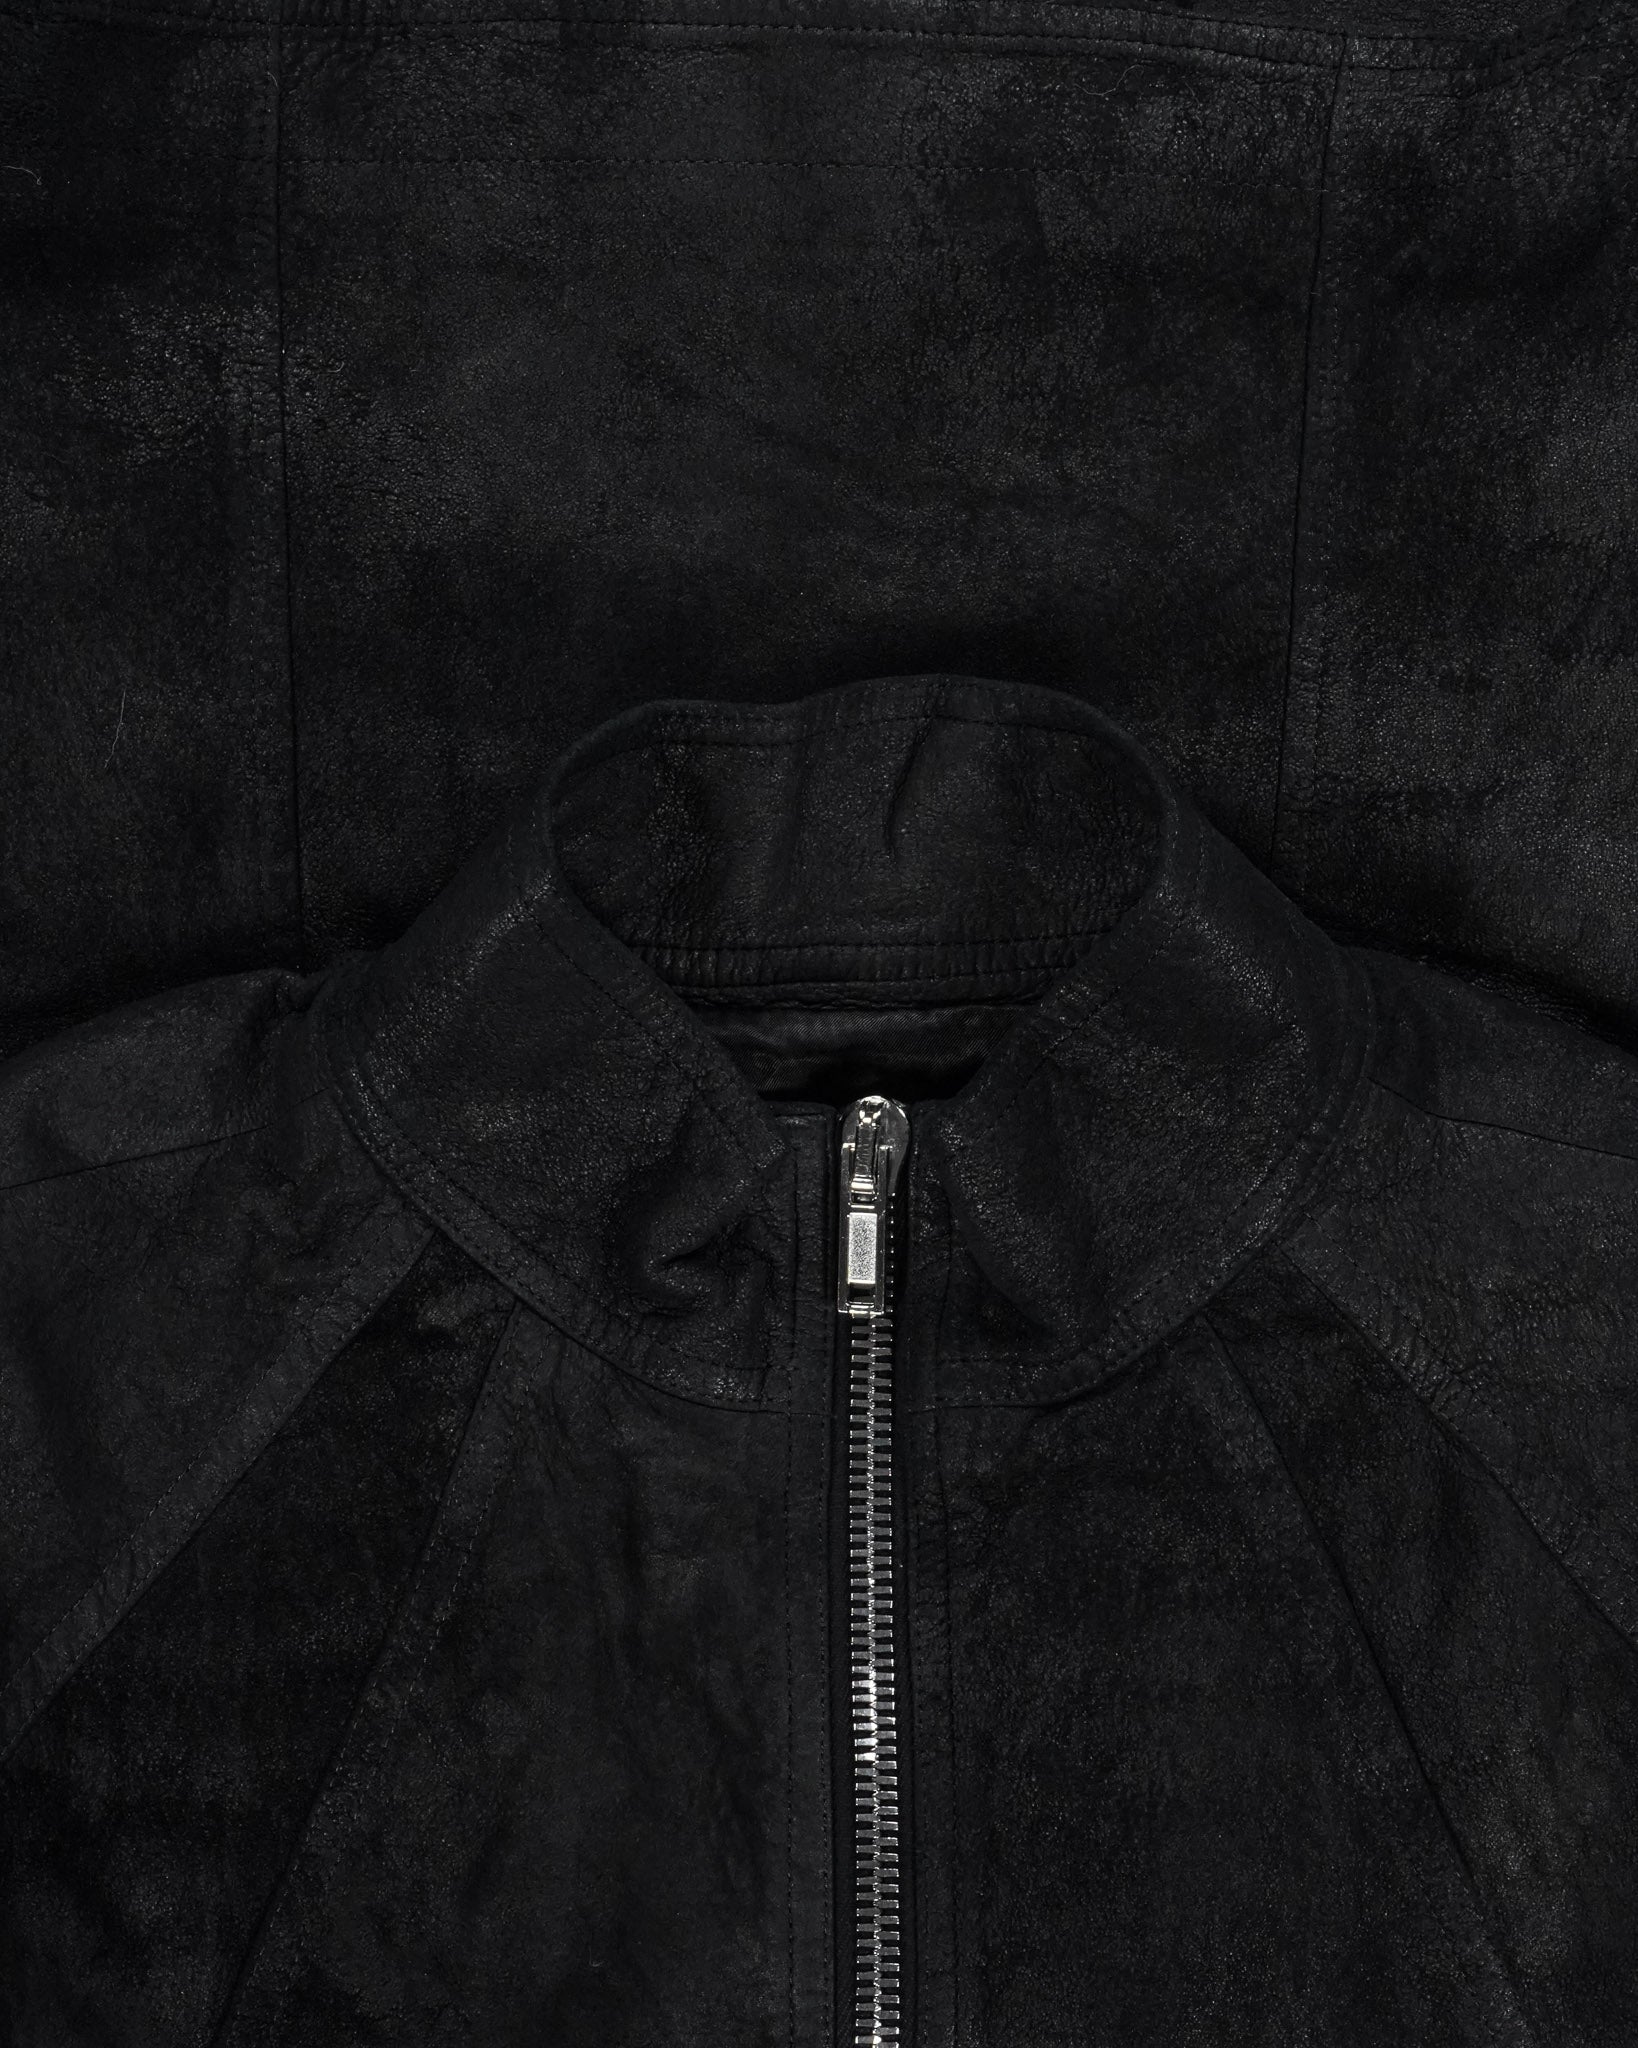 Rick Owens “Blistered” Leather Jacket - SS08 "Creatch"